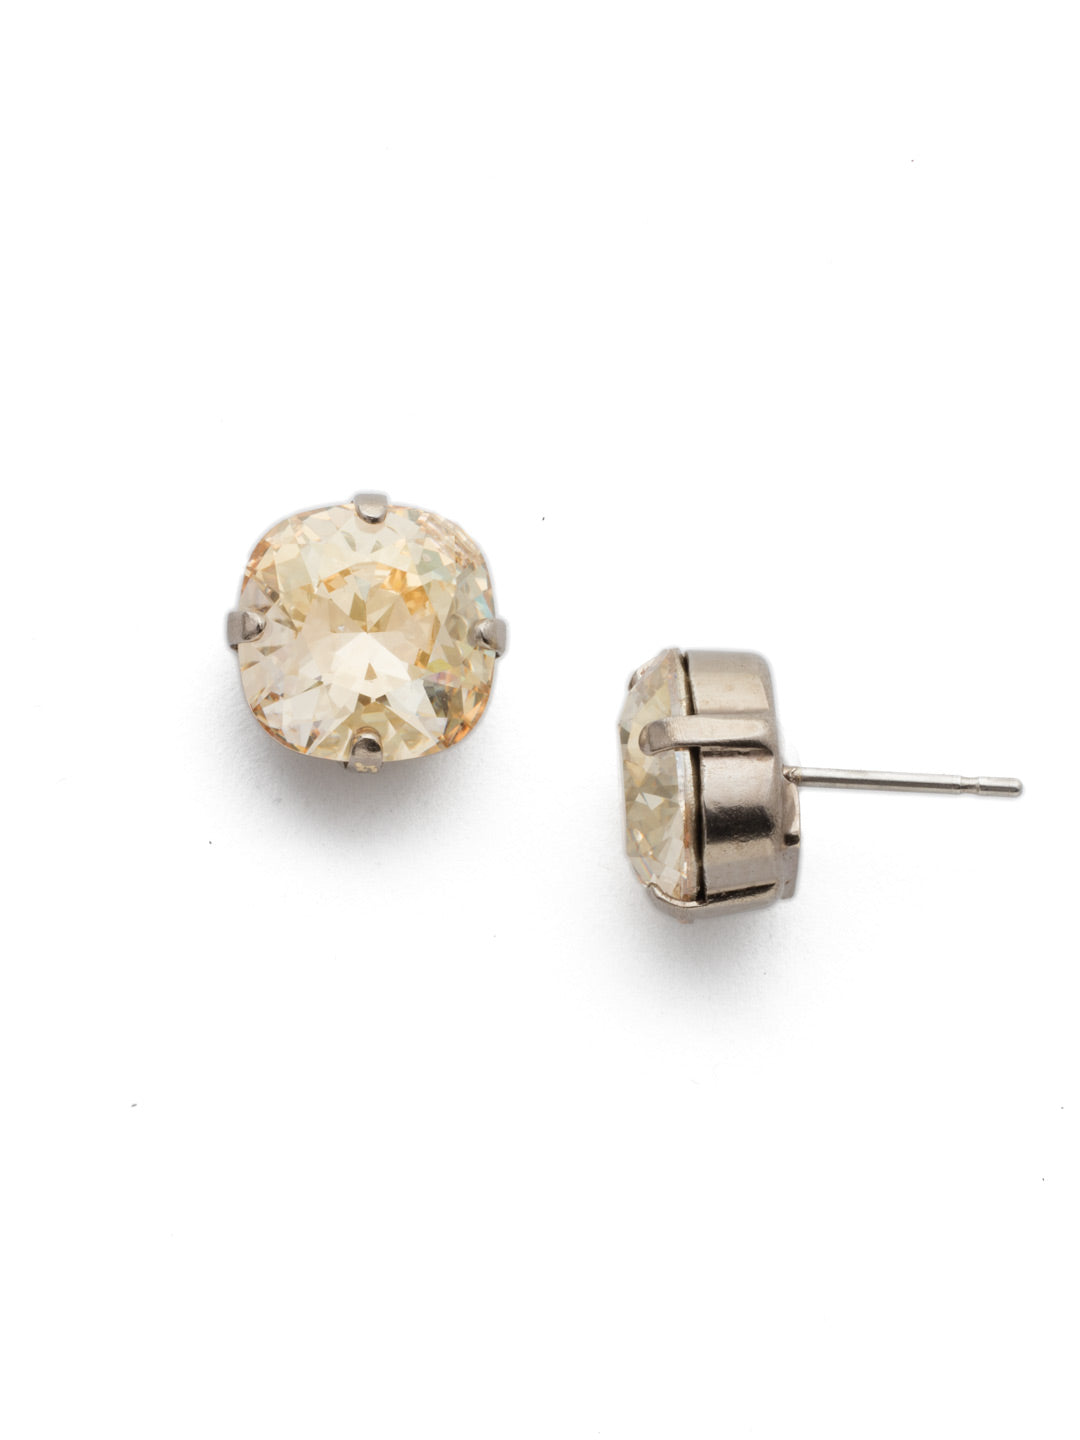 Halcyon Stud Earrings - EDH25ASCCH - <p>A beautiful, luminous cushion-cut crystal in a classic four-pronged setting that's ideal for everyday wear. From Sorrelli's Crystal Champagne collection in our Antique Silver-tone finish.</p>